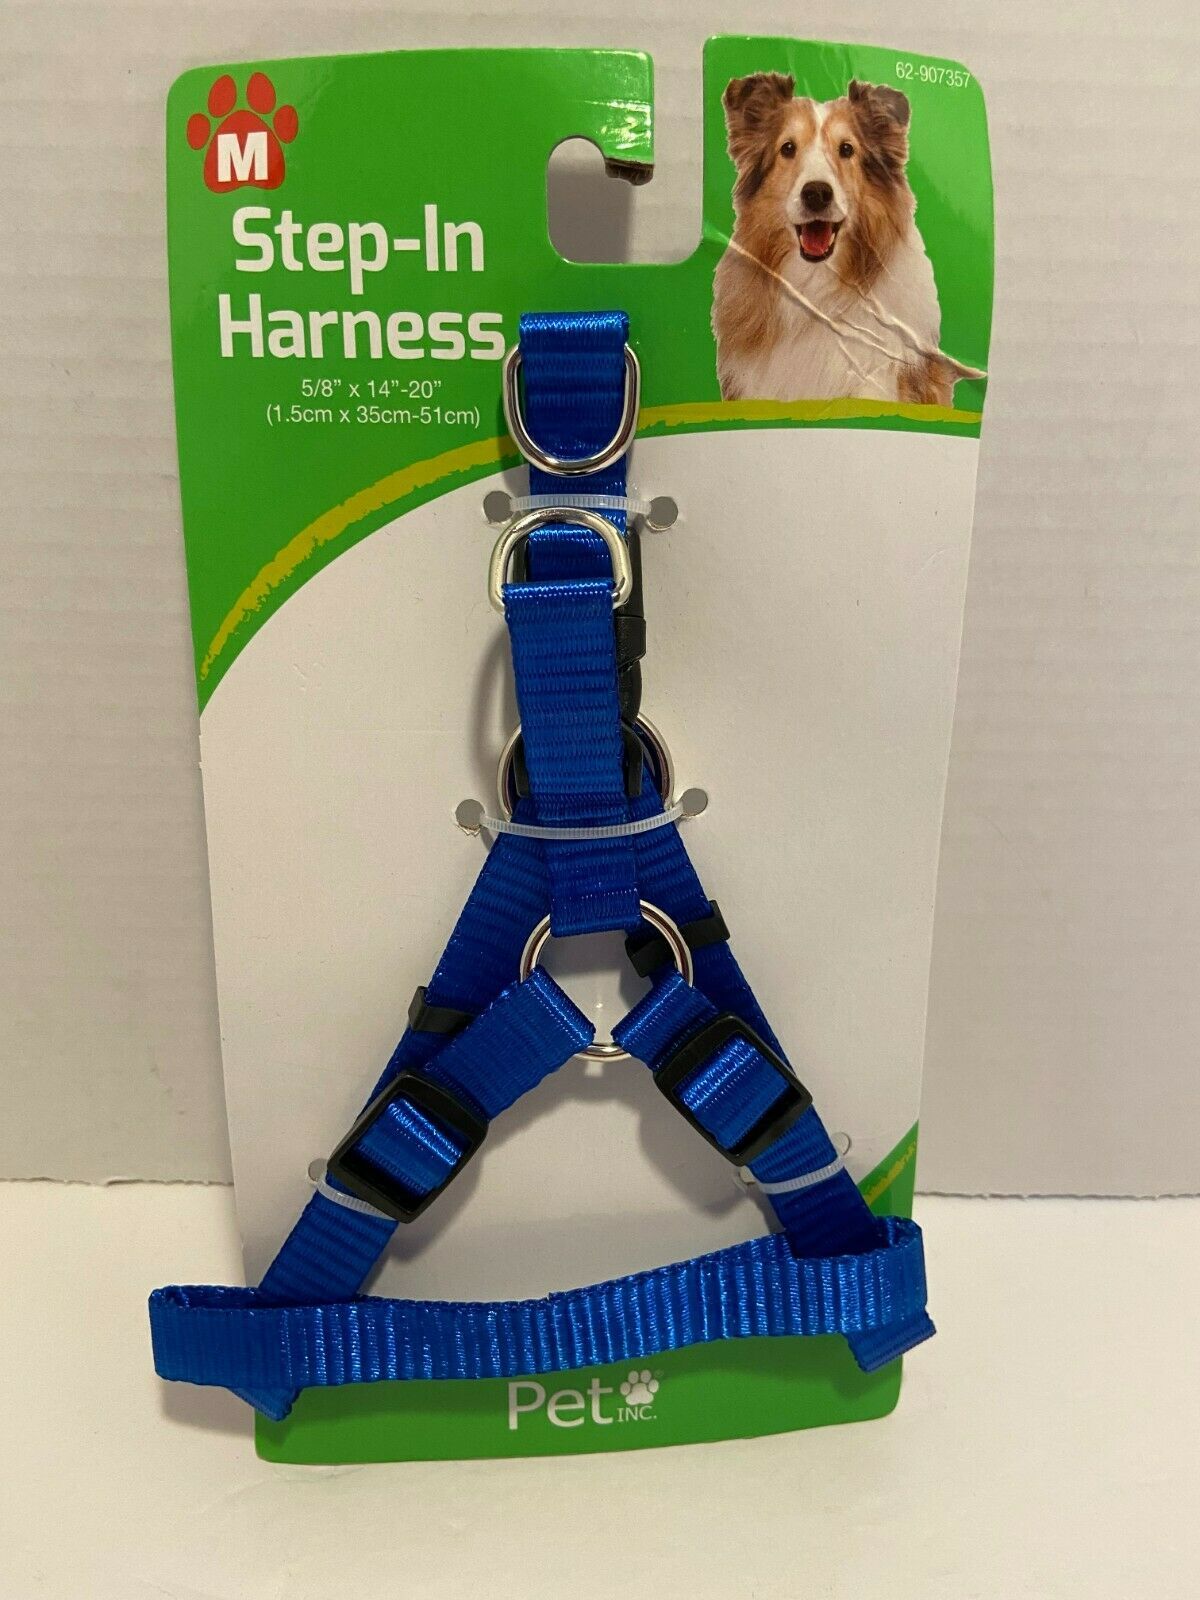 Nylon Step In Safety Dog/Puppy/Pet Animal Harness Adjustable Reflective Blue M - $5.45